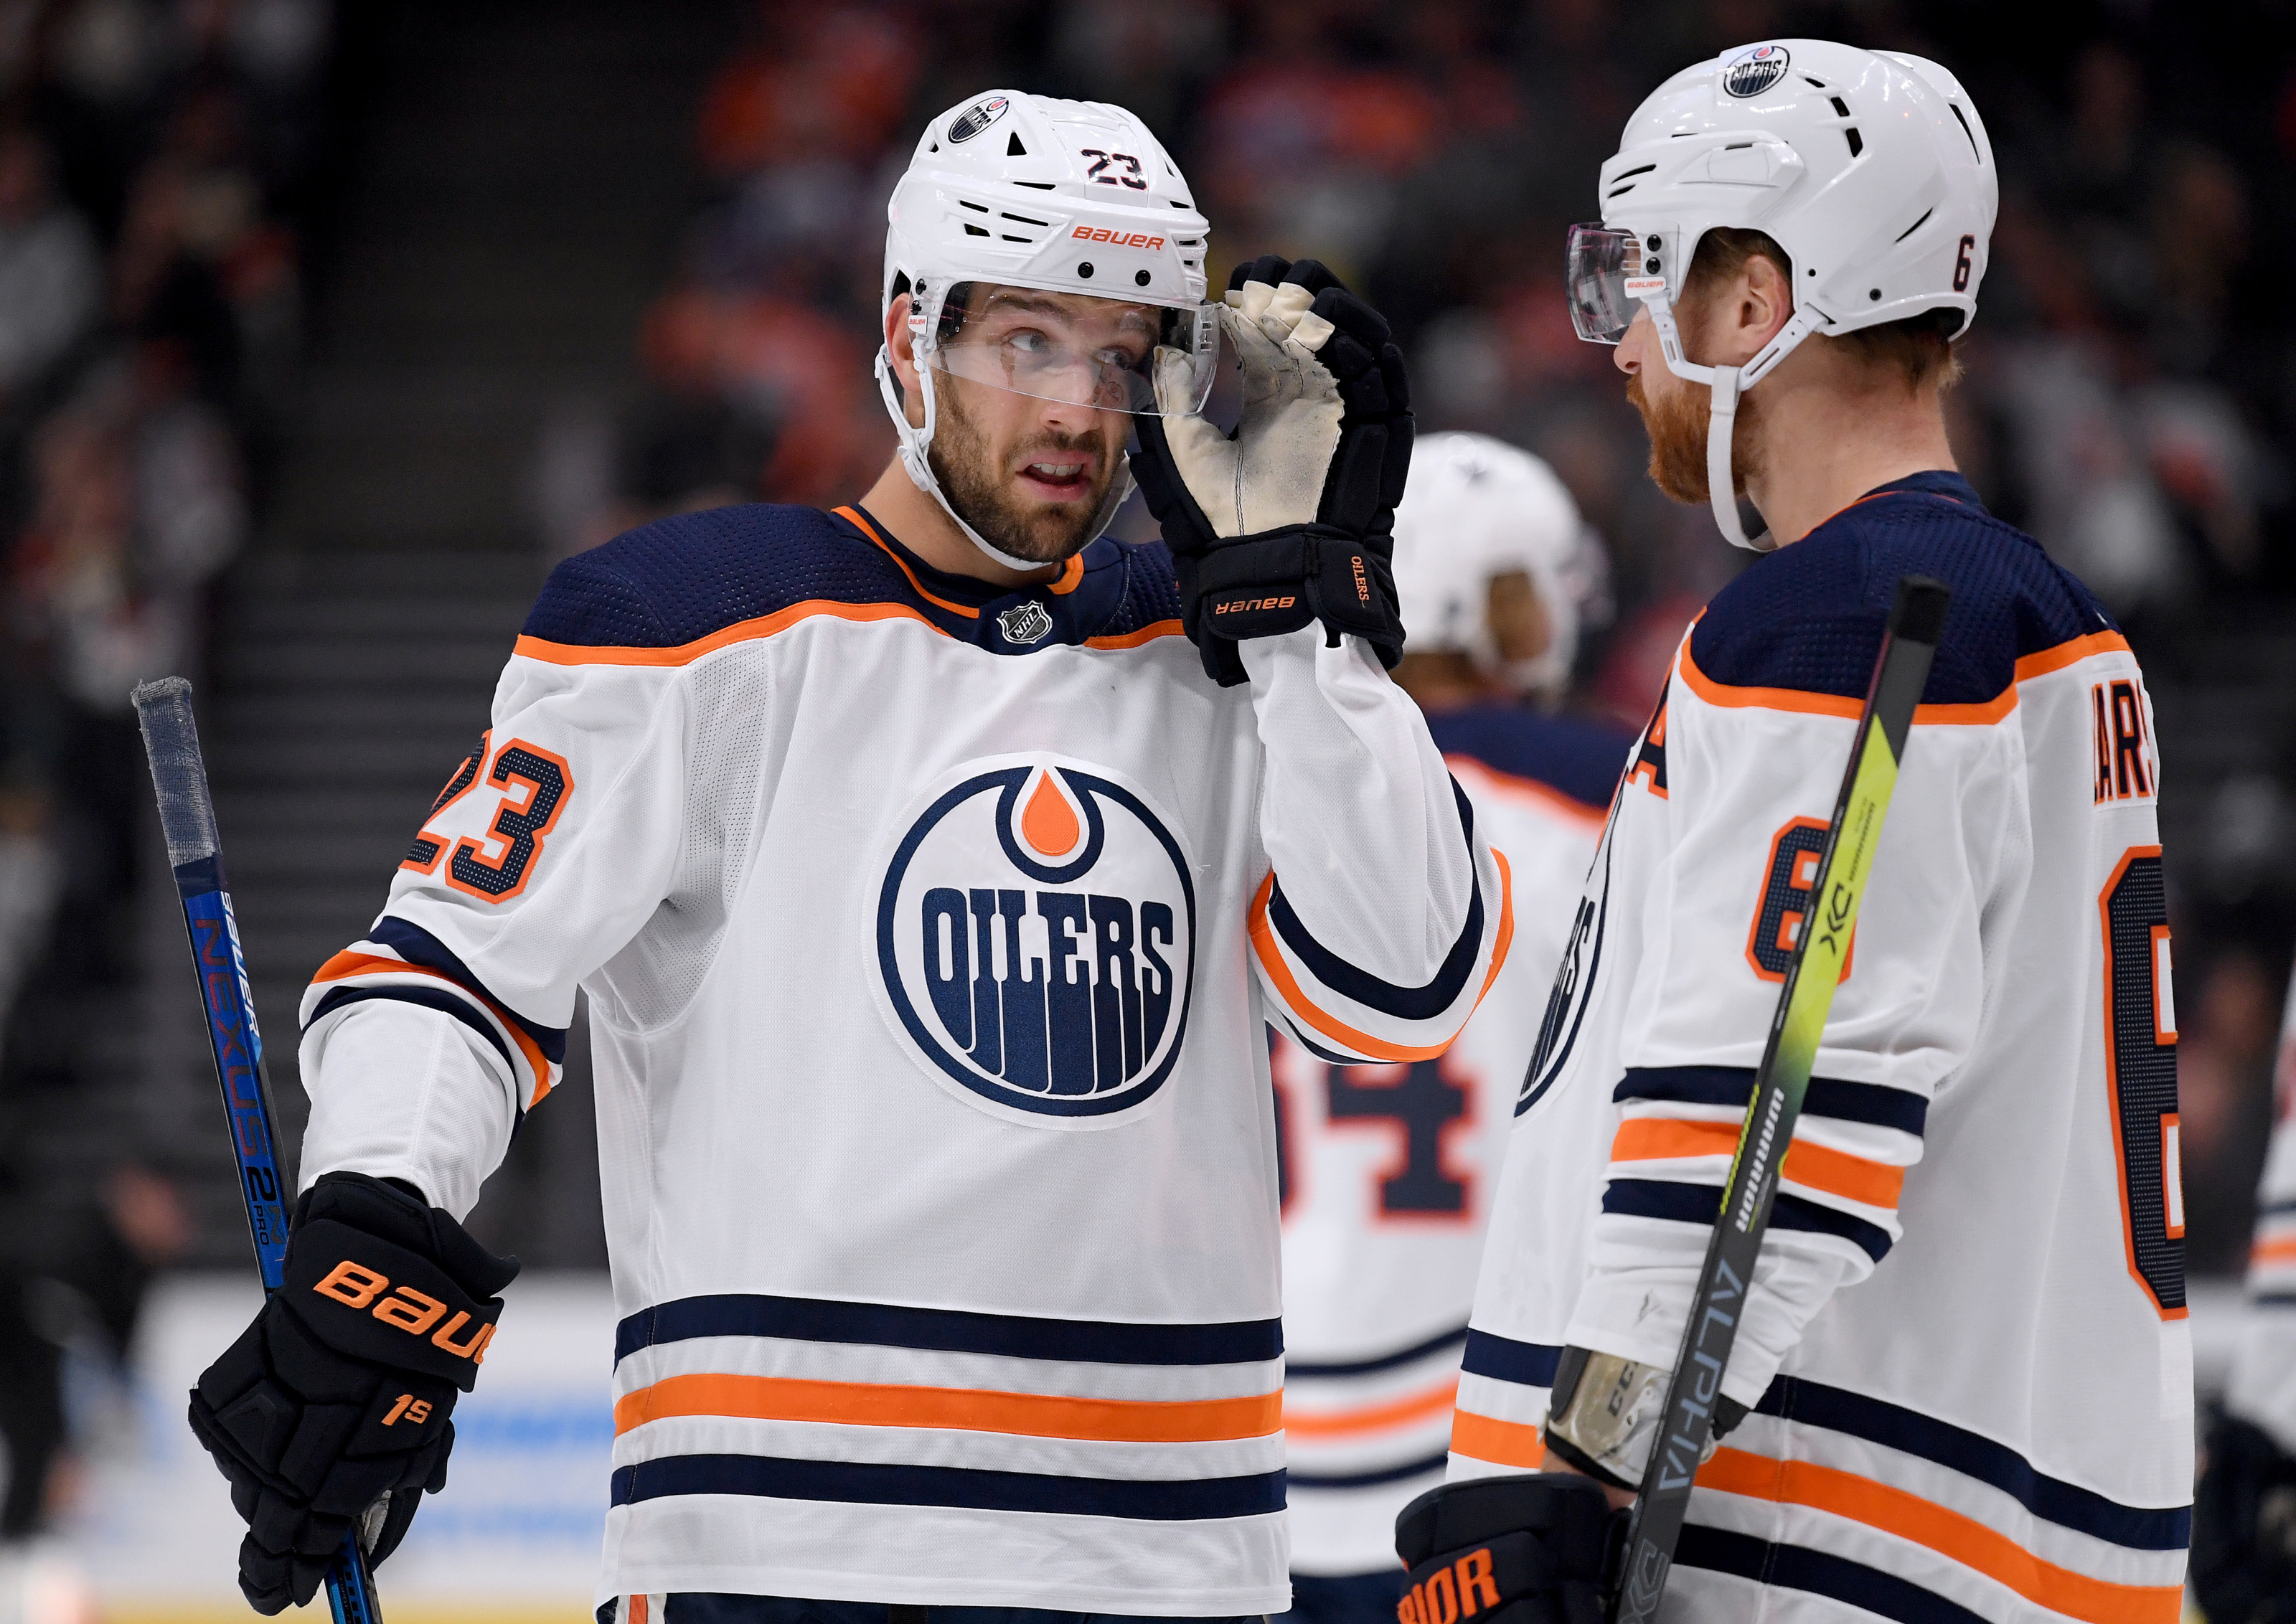 Oscar Klefbom signs seven-year, $29-million pact with Oilers - The